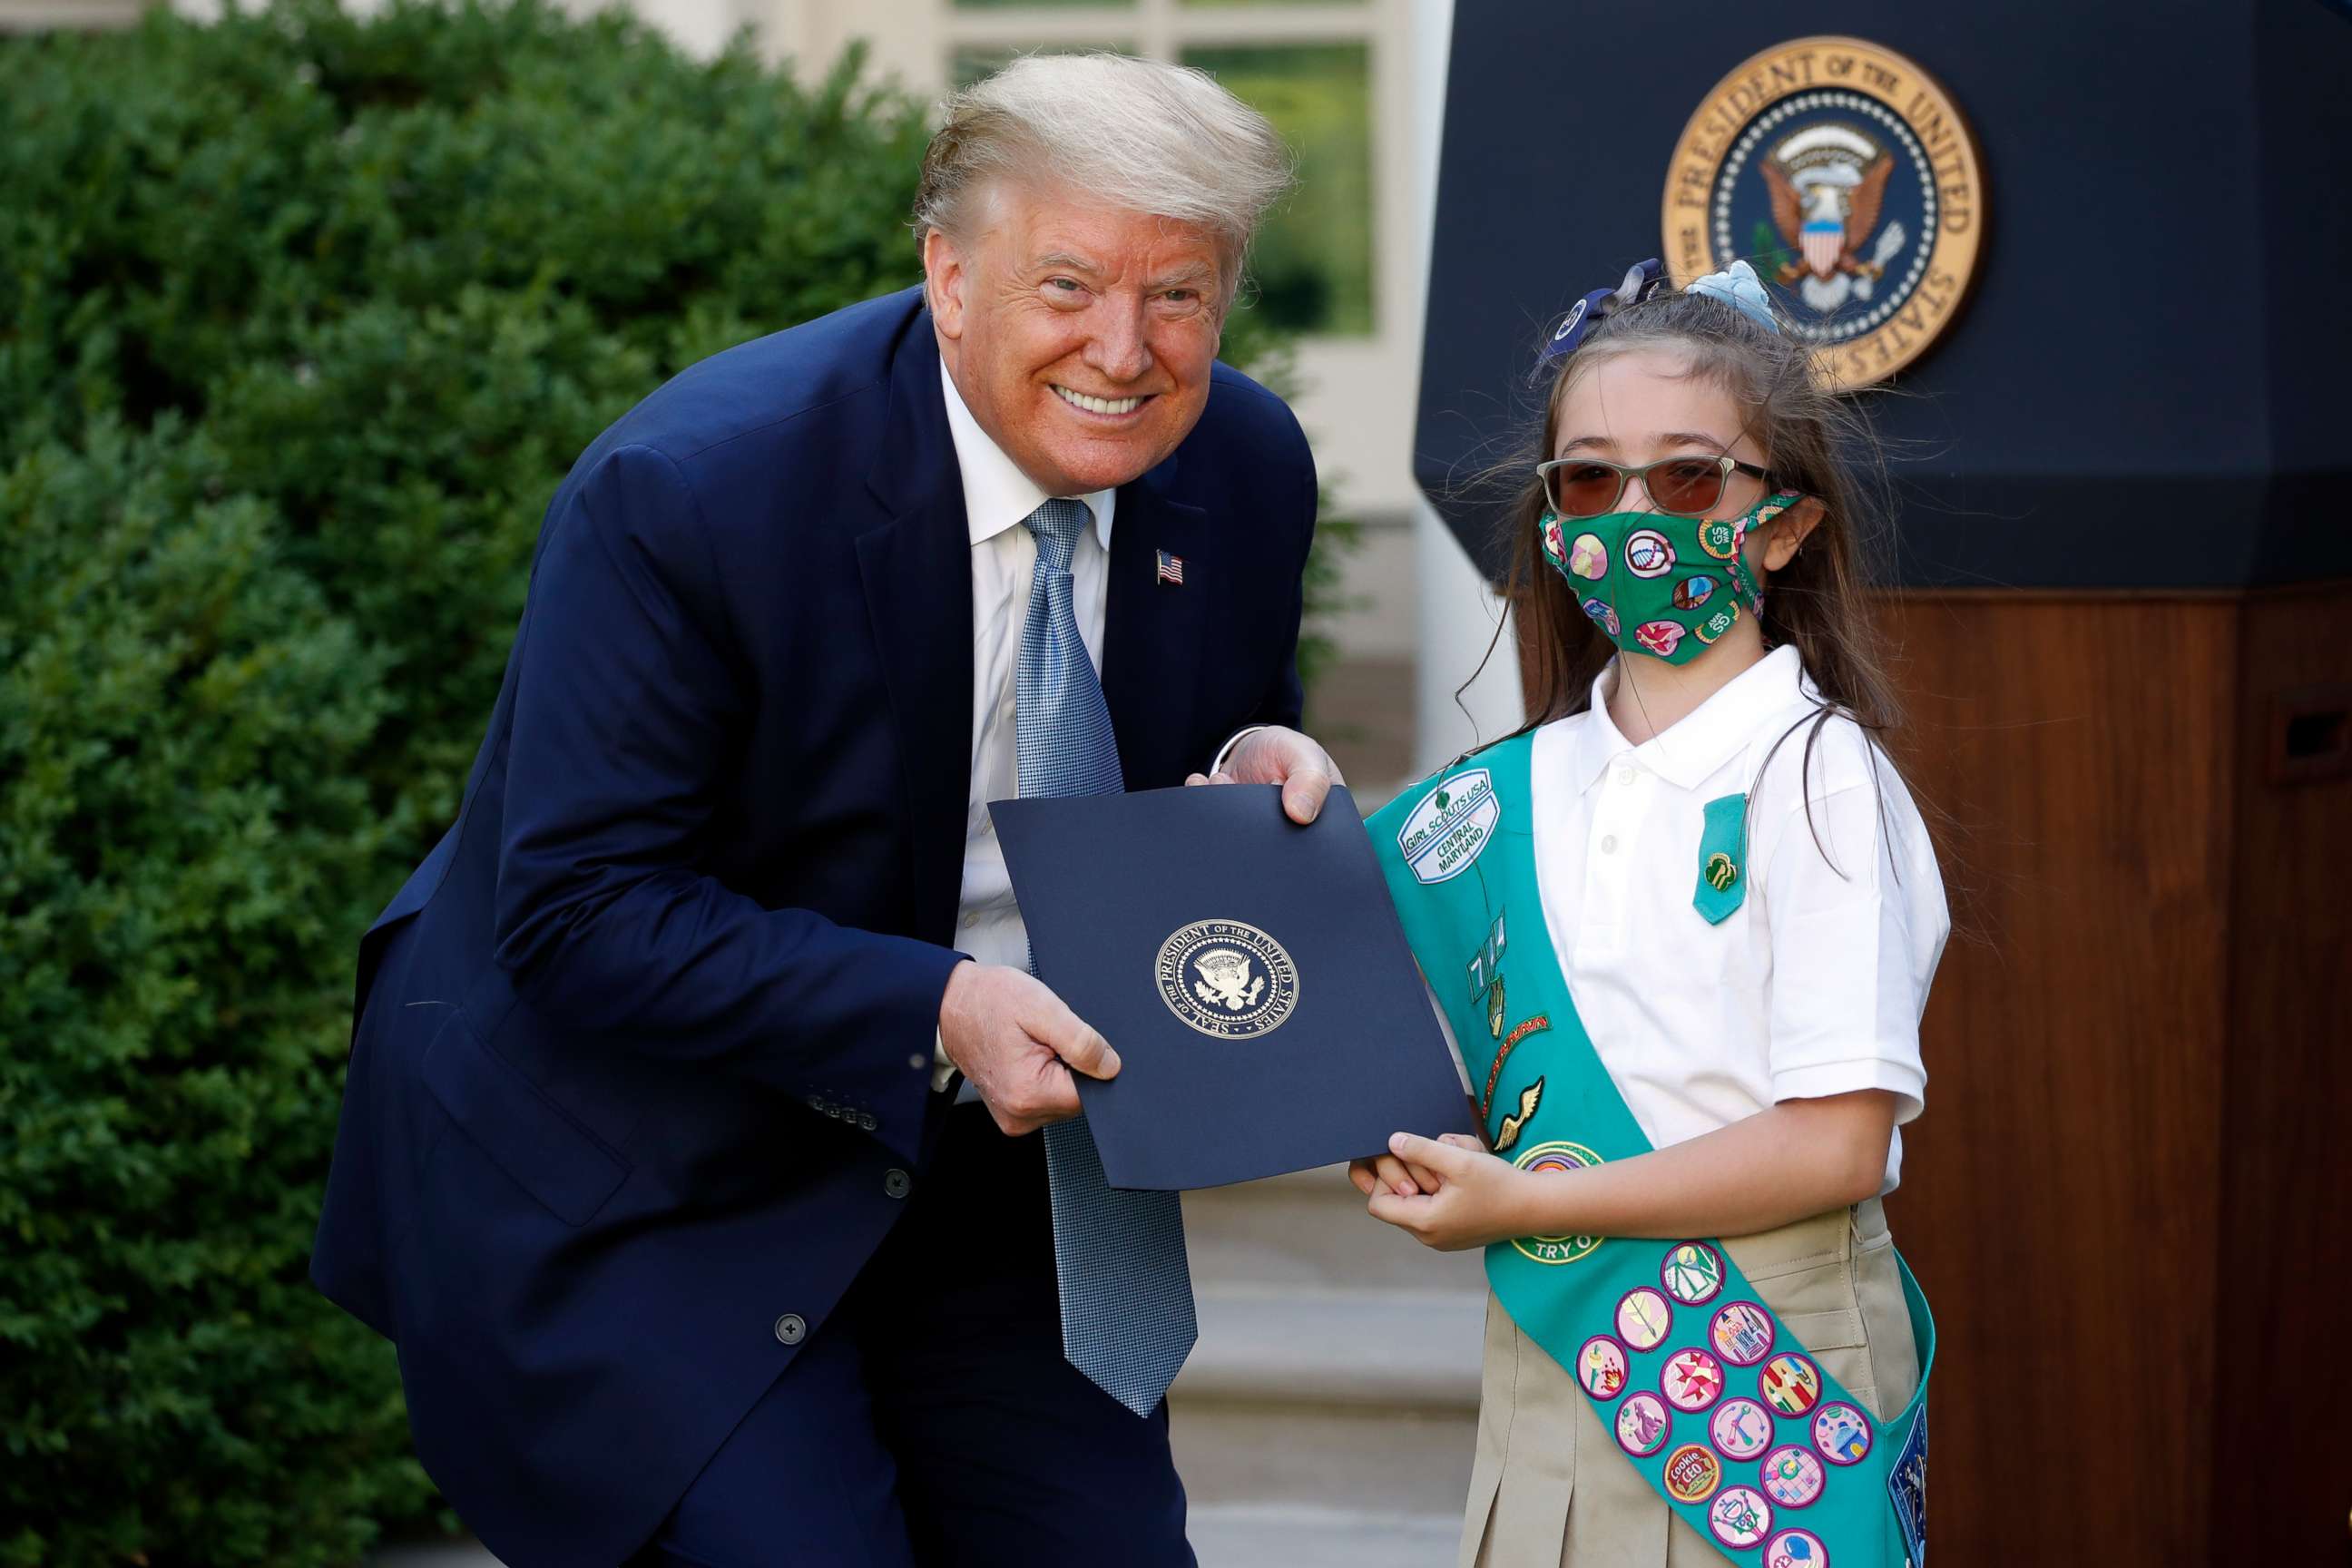 PHOTO: President Donald Trump poses for a photo with Girl Scout Troop 744 member Lauren Matney during a presidential recognition ceremony in the Rose Garden of the White House, May 15, 2020, in Washington.